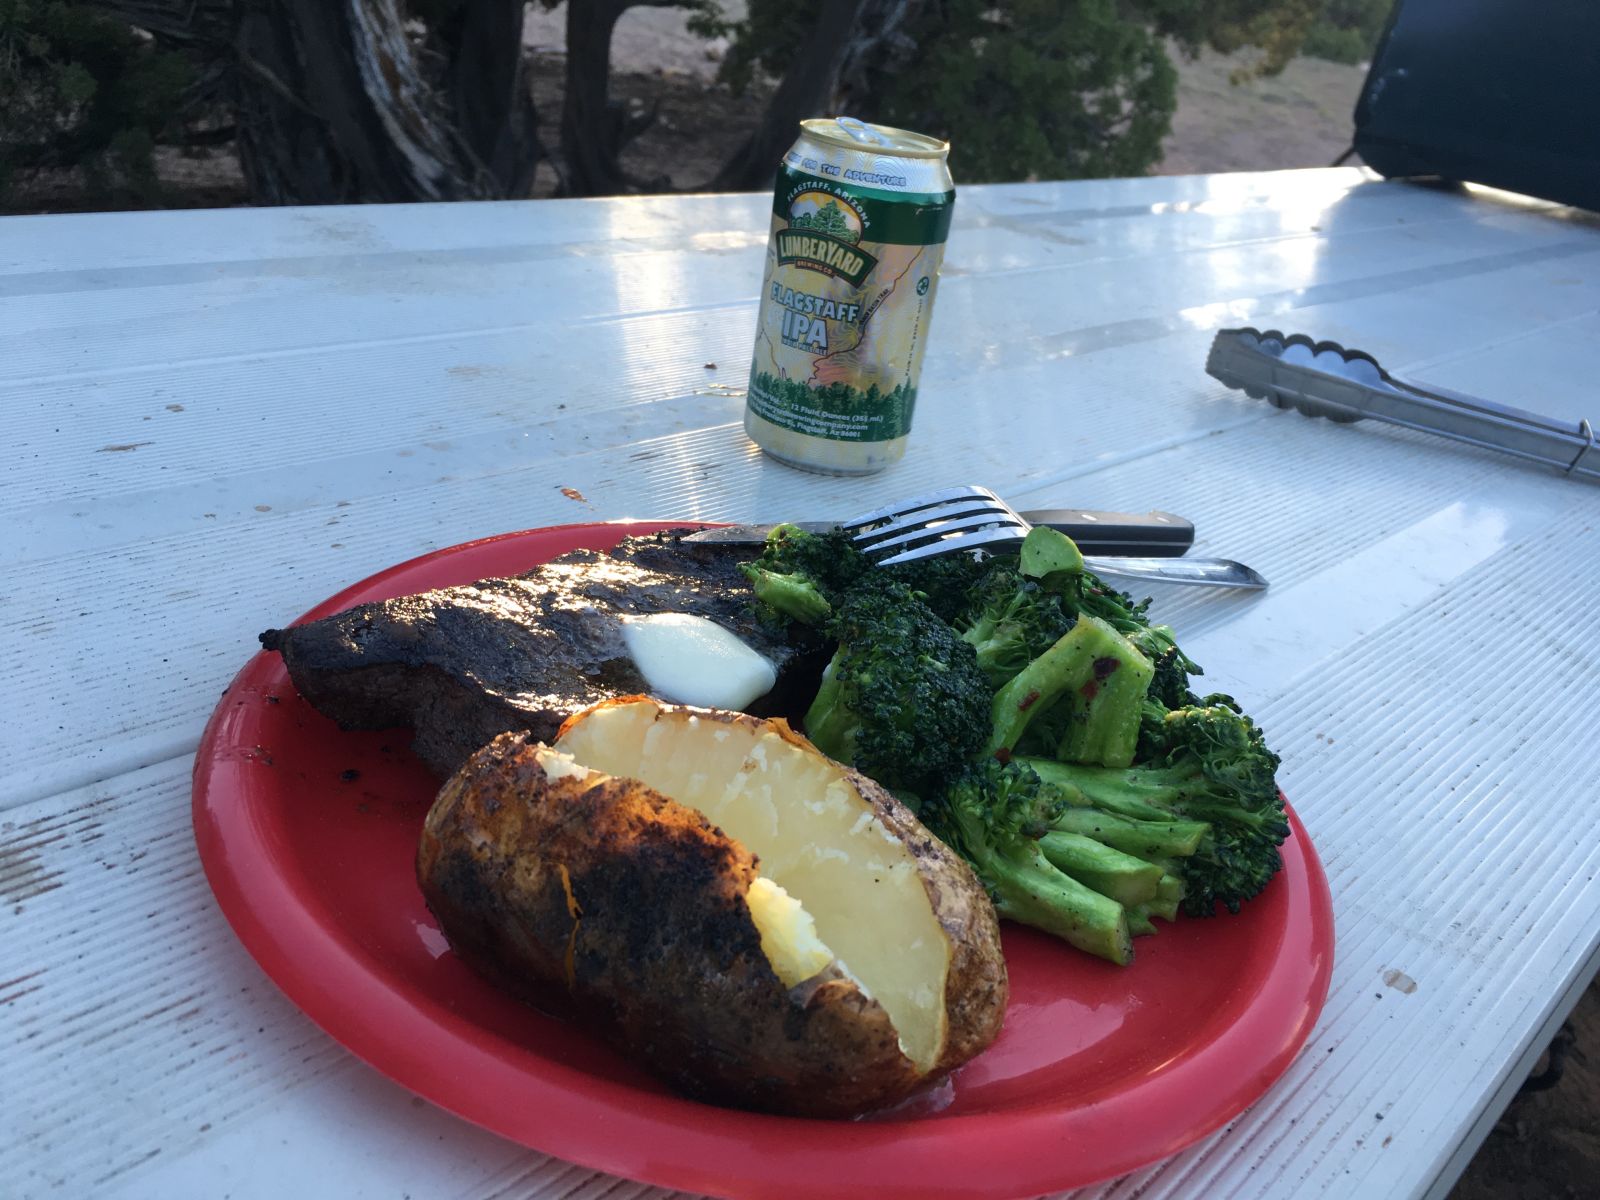 A final gluttonous send-off before the long cruise back home. Cathedral Valley Campground - I will see you again.